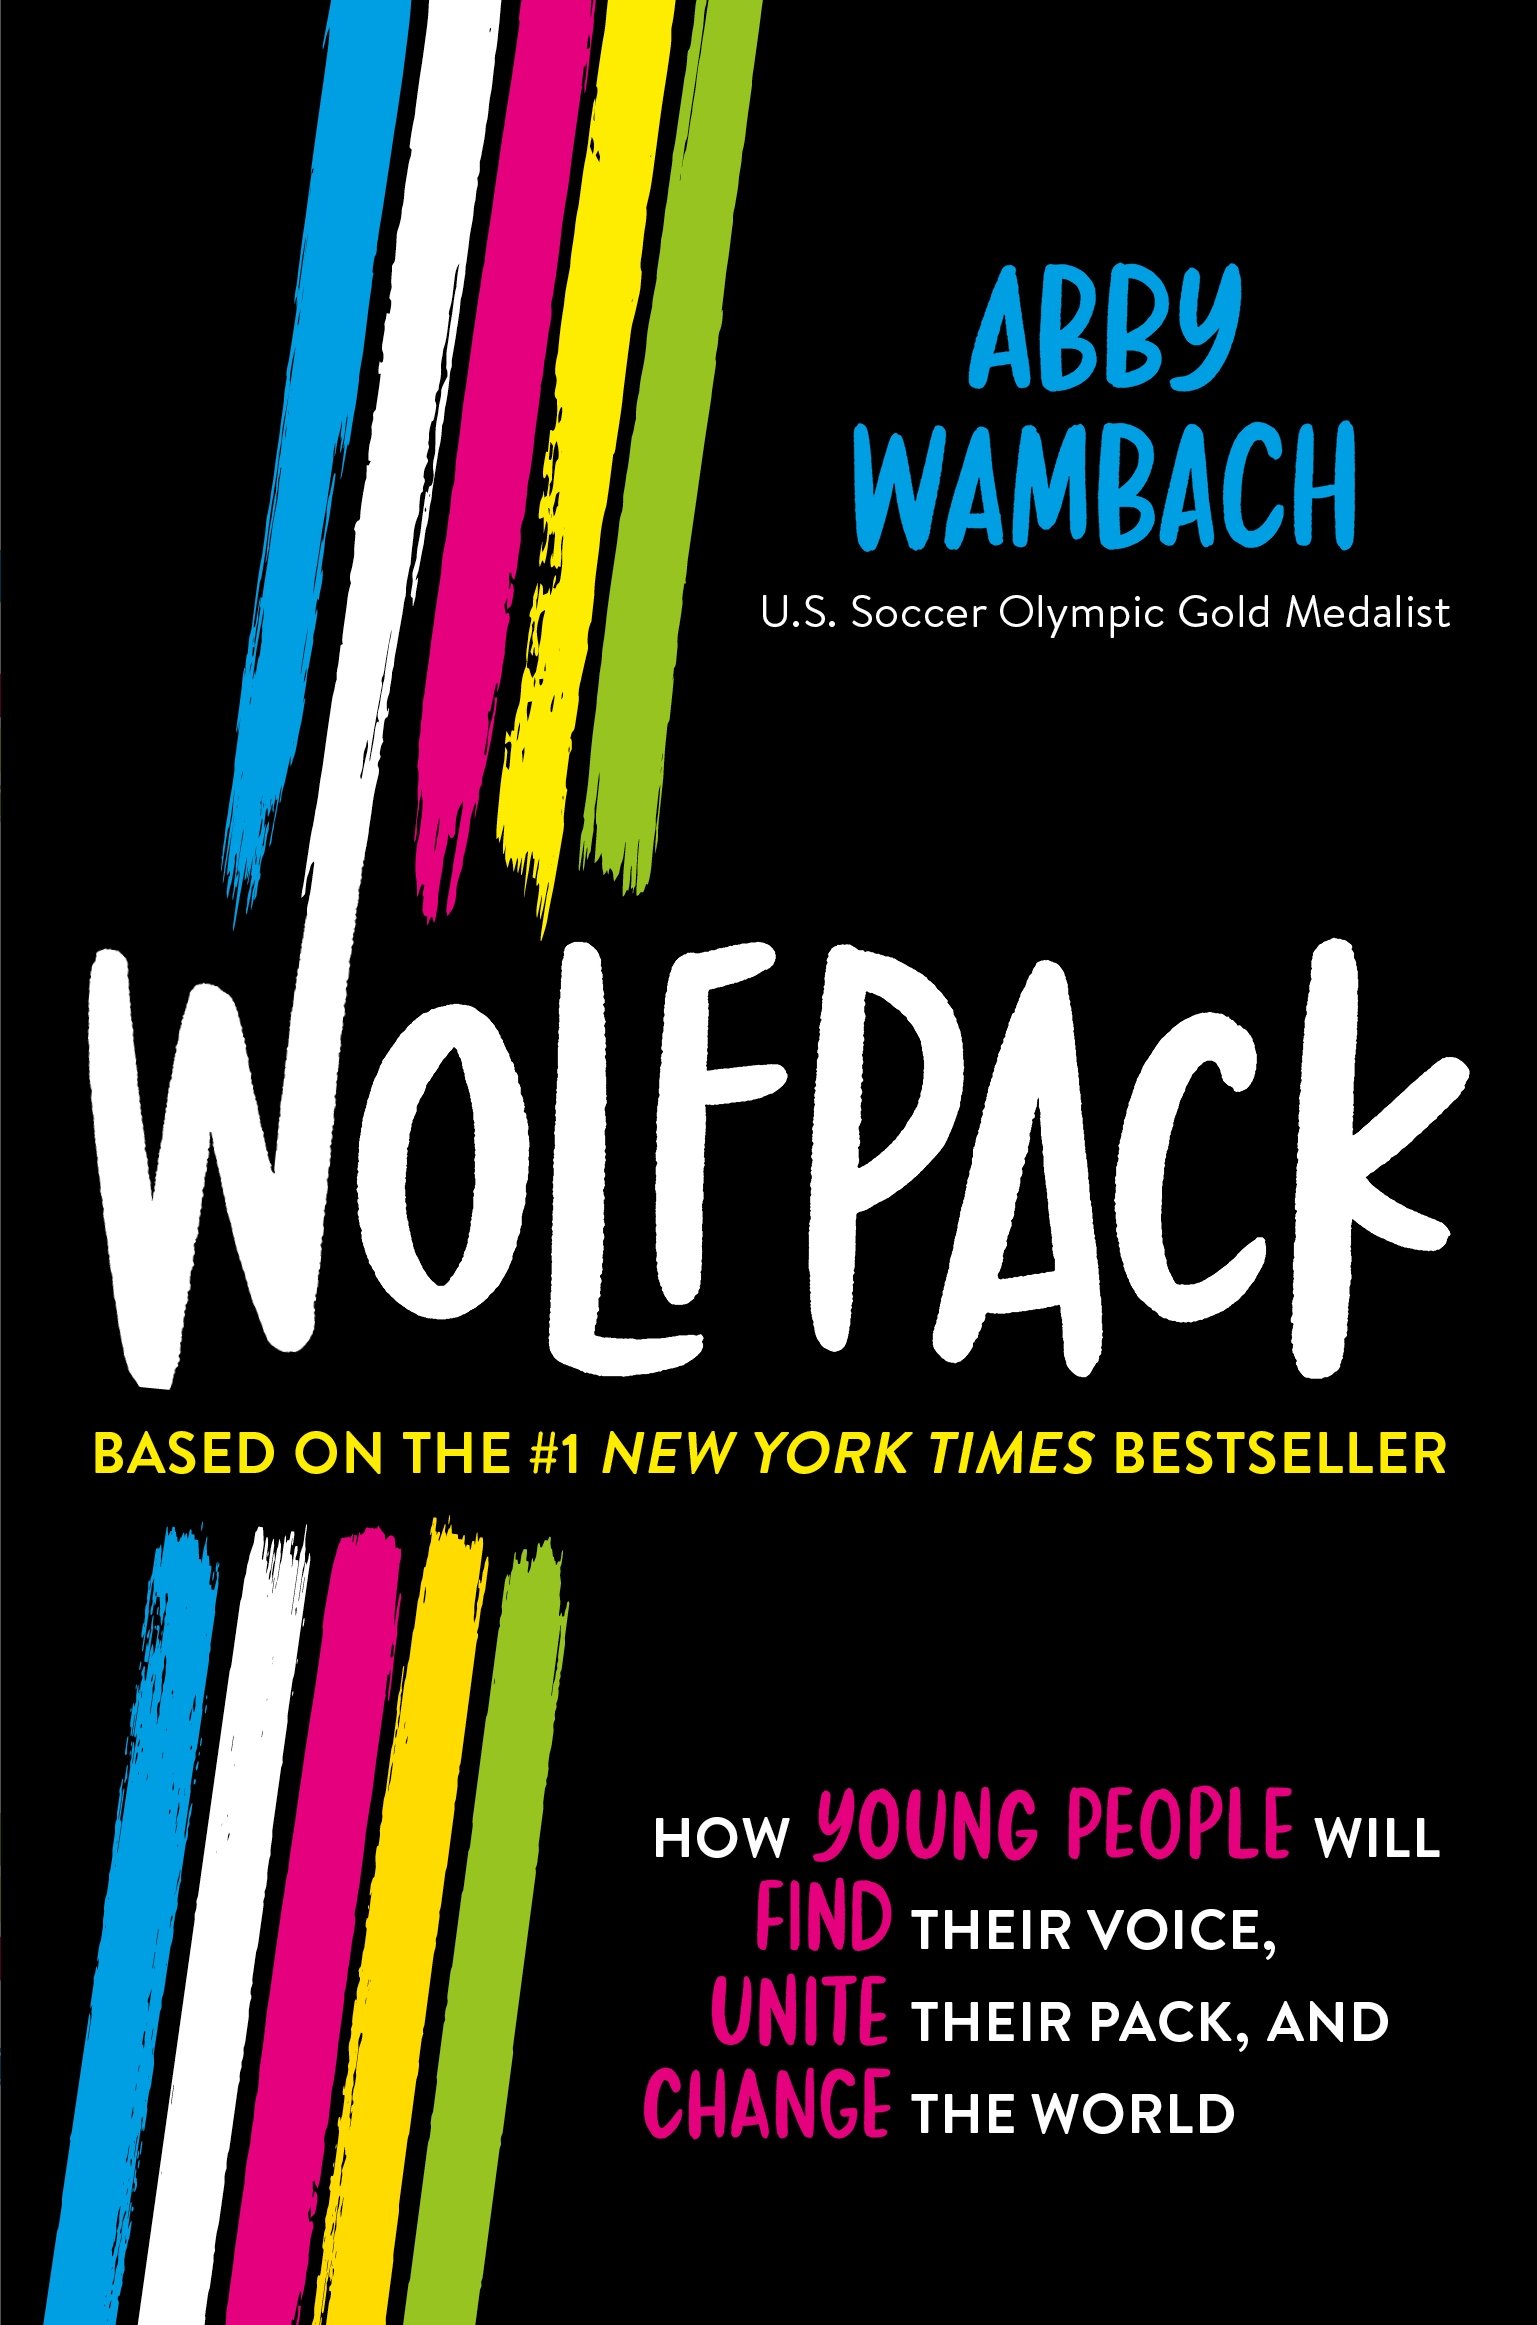 Book “Wolfpack (Young Readers Edition)” by Abby Wambach — October 6, 2020